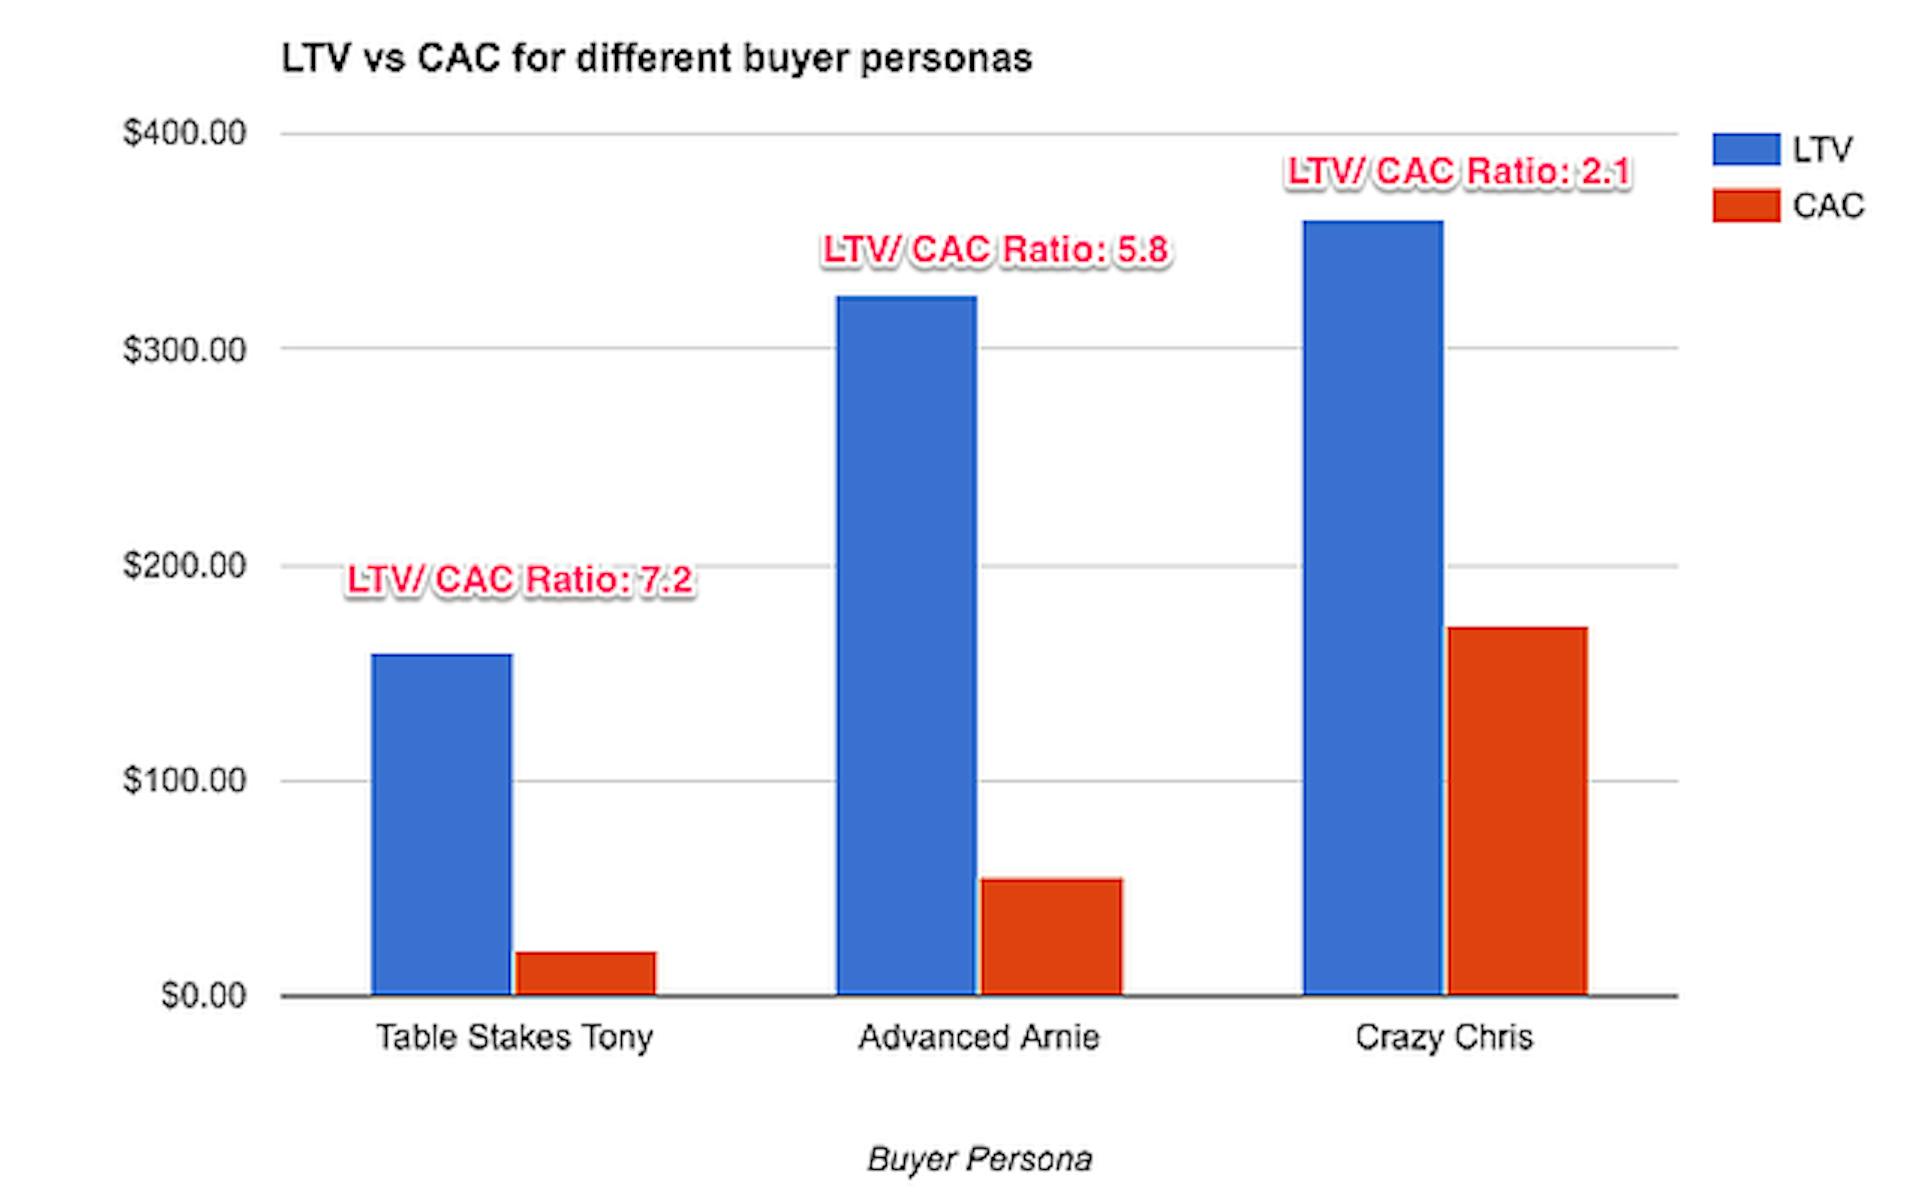 LTV vs CAC for different buyer personas shows variance and how some personas have a healthier LTV/CAC Ratio 